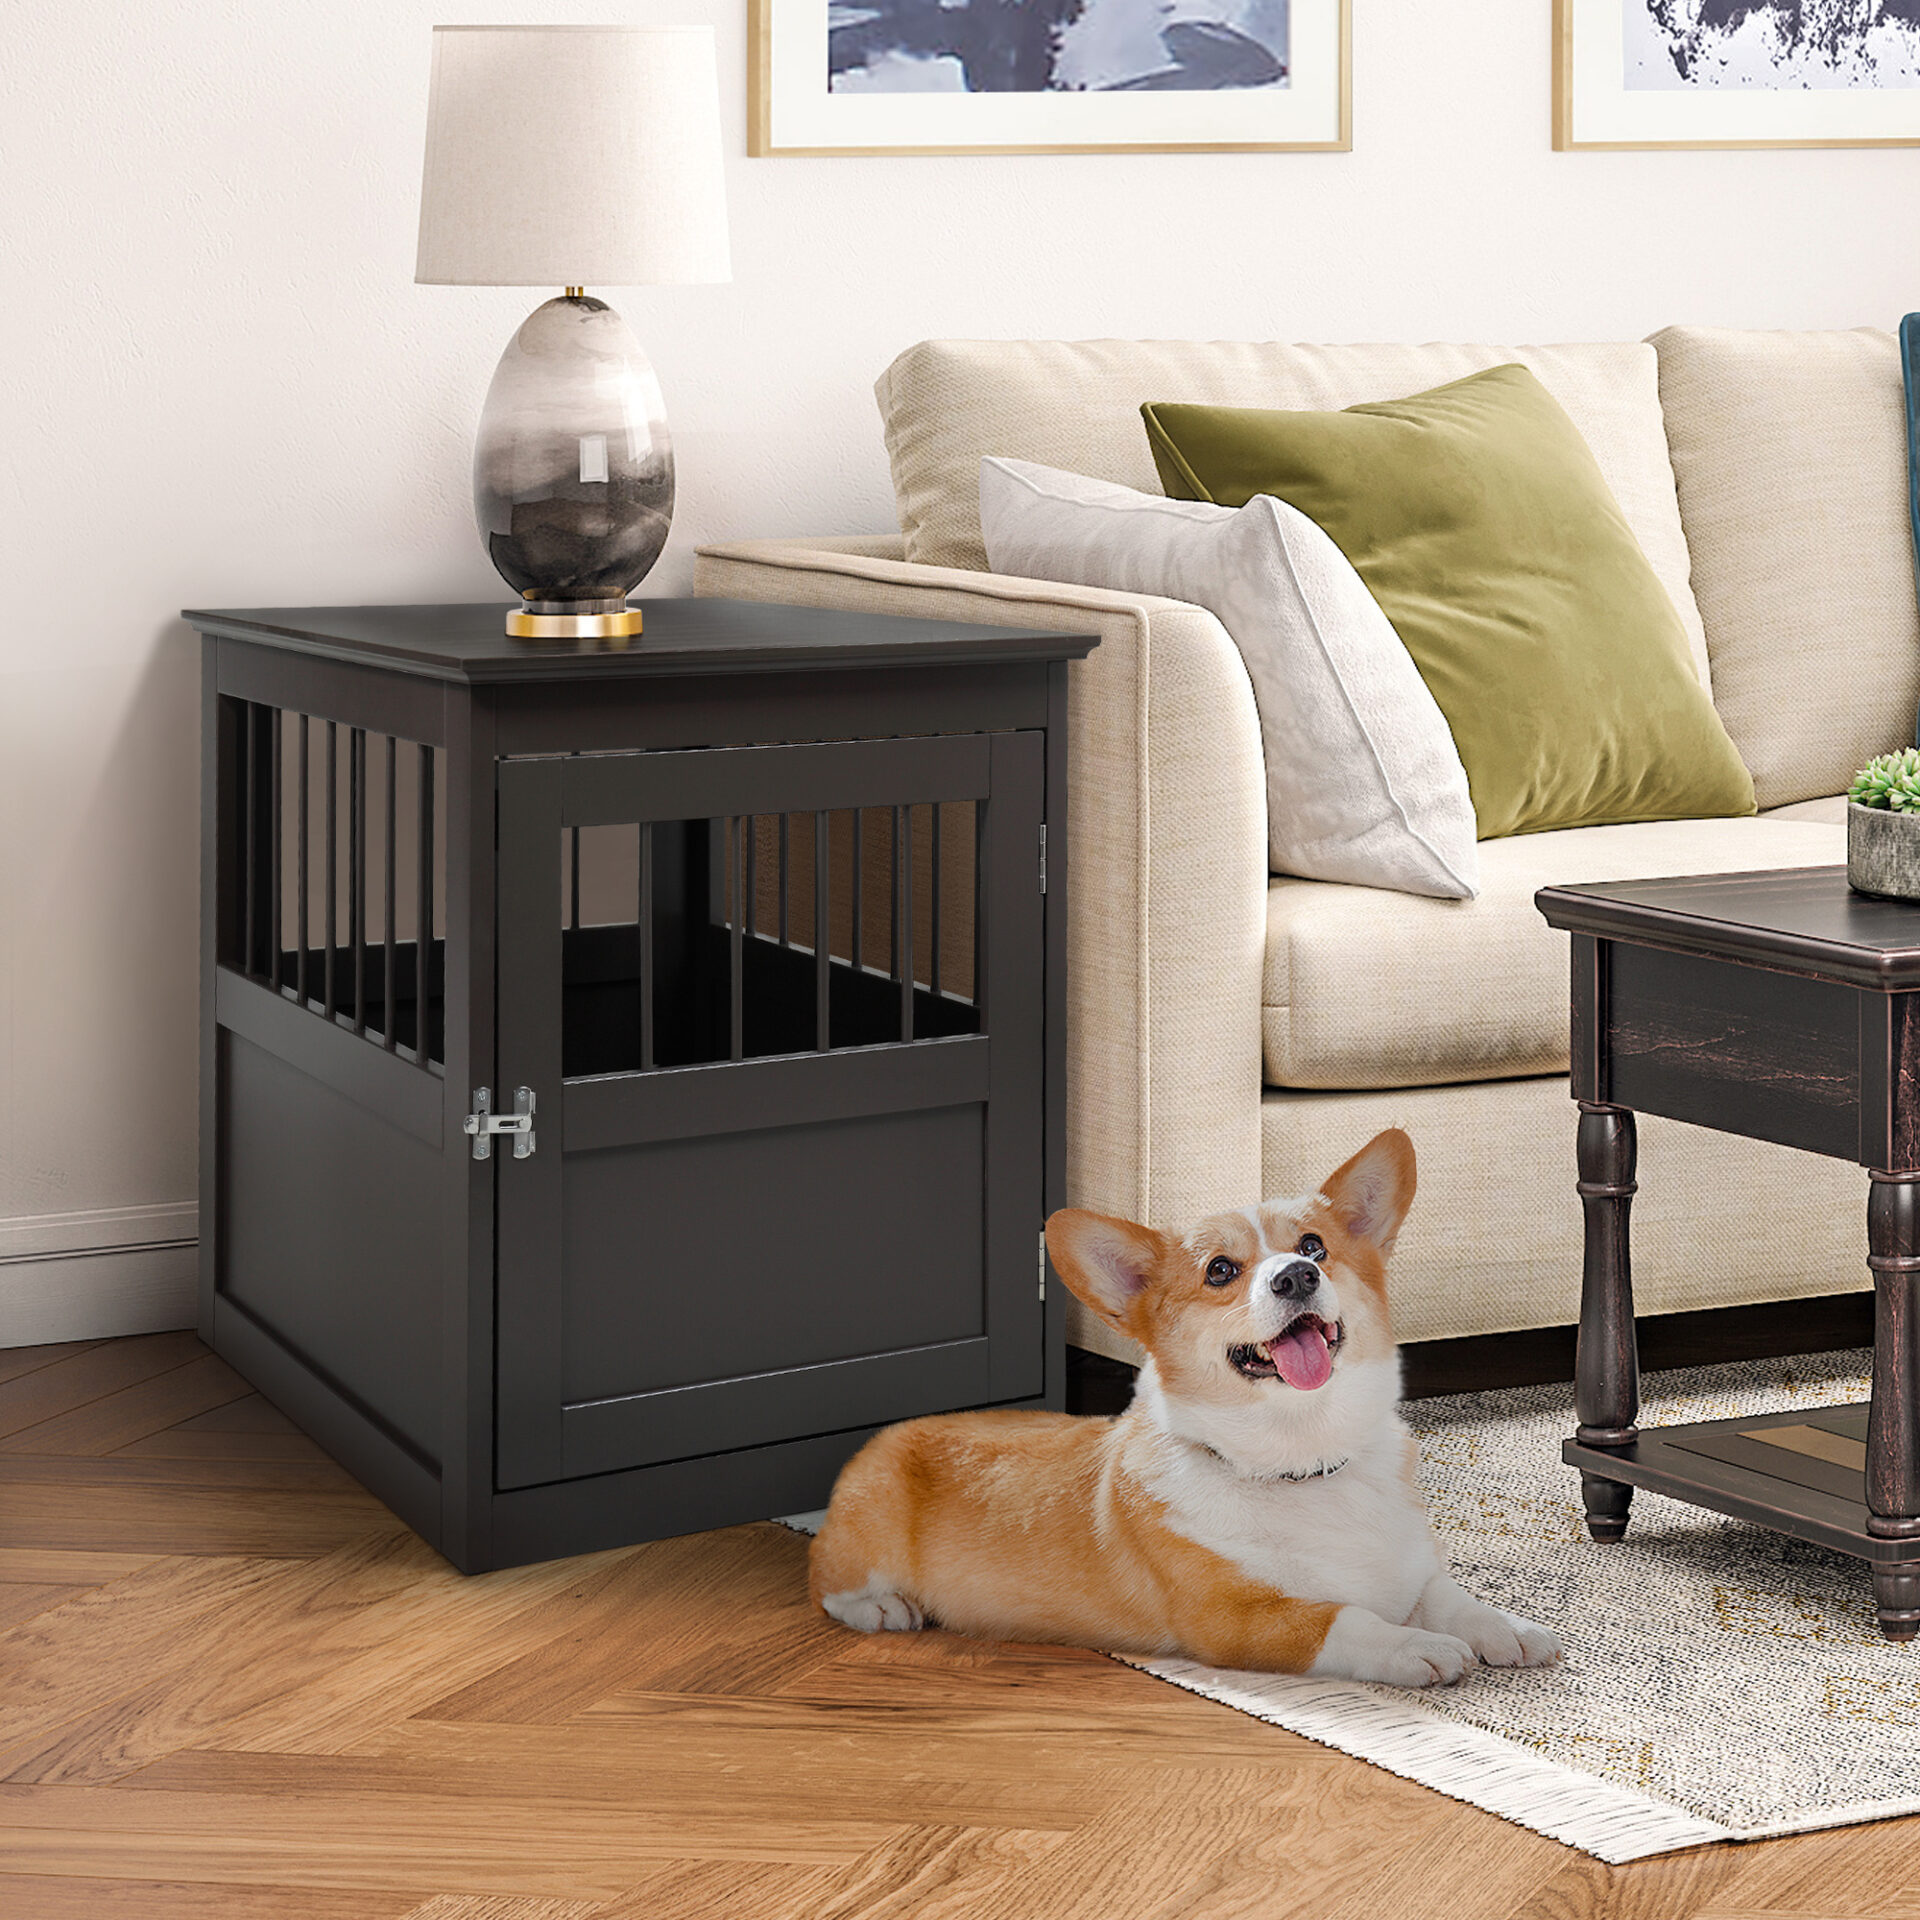 The Best Dog Crate Furniture for Fashion and Function